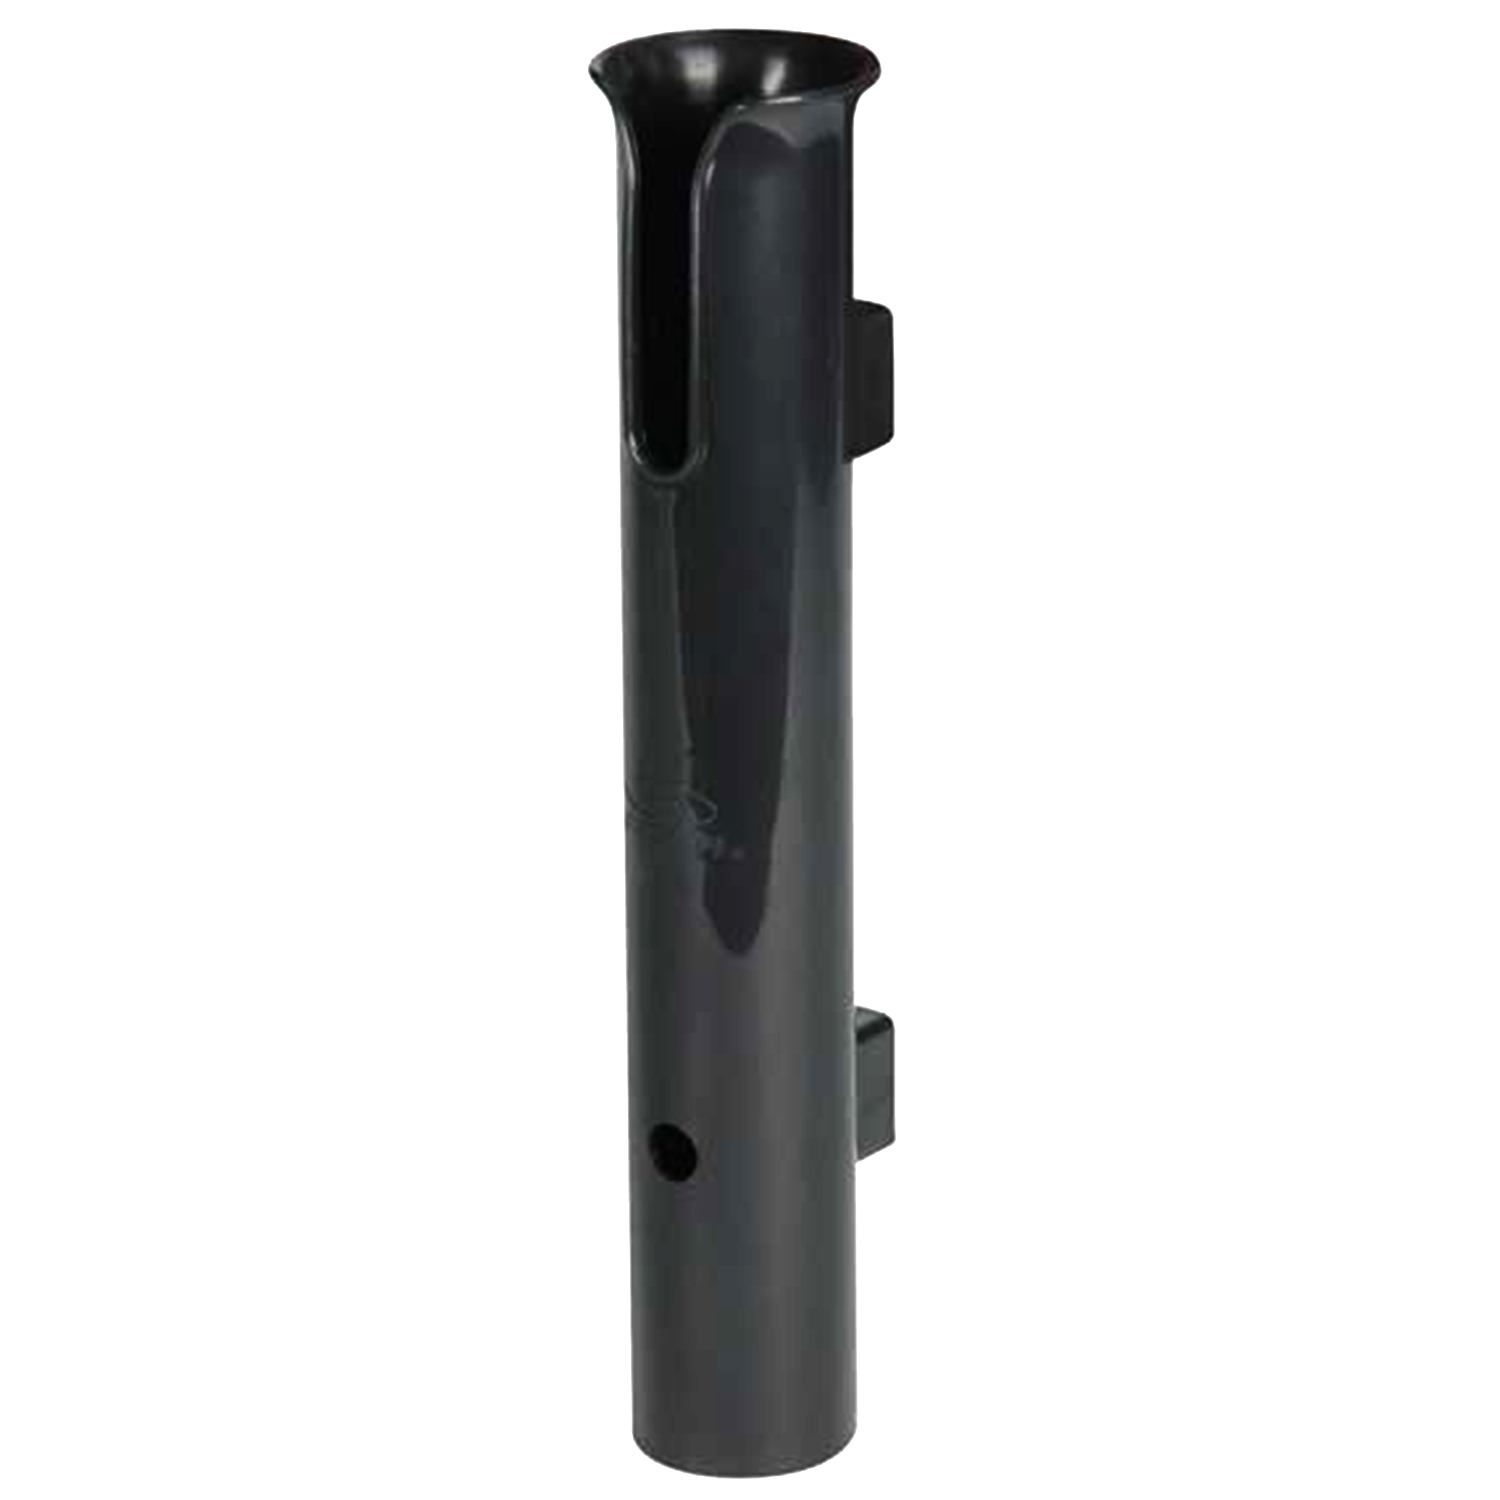 If anyone owns an  generic rod holder, are the 4 black clips